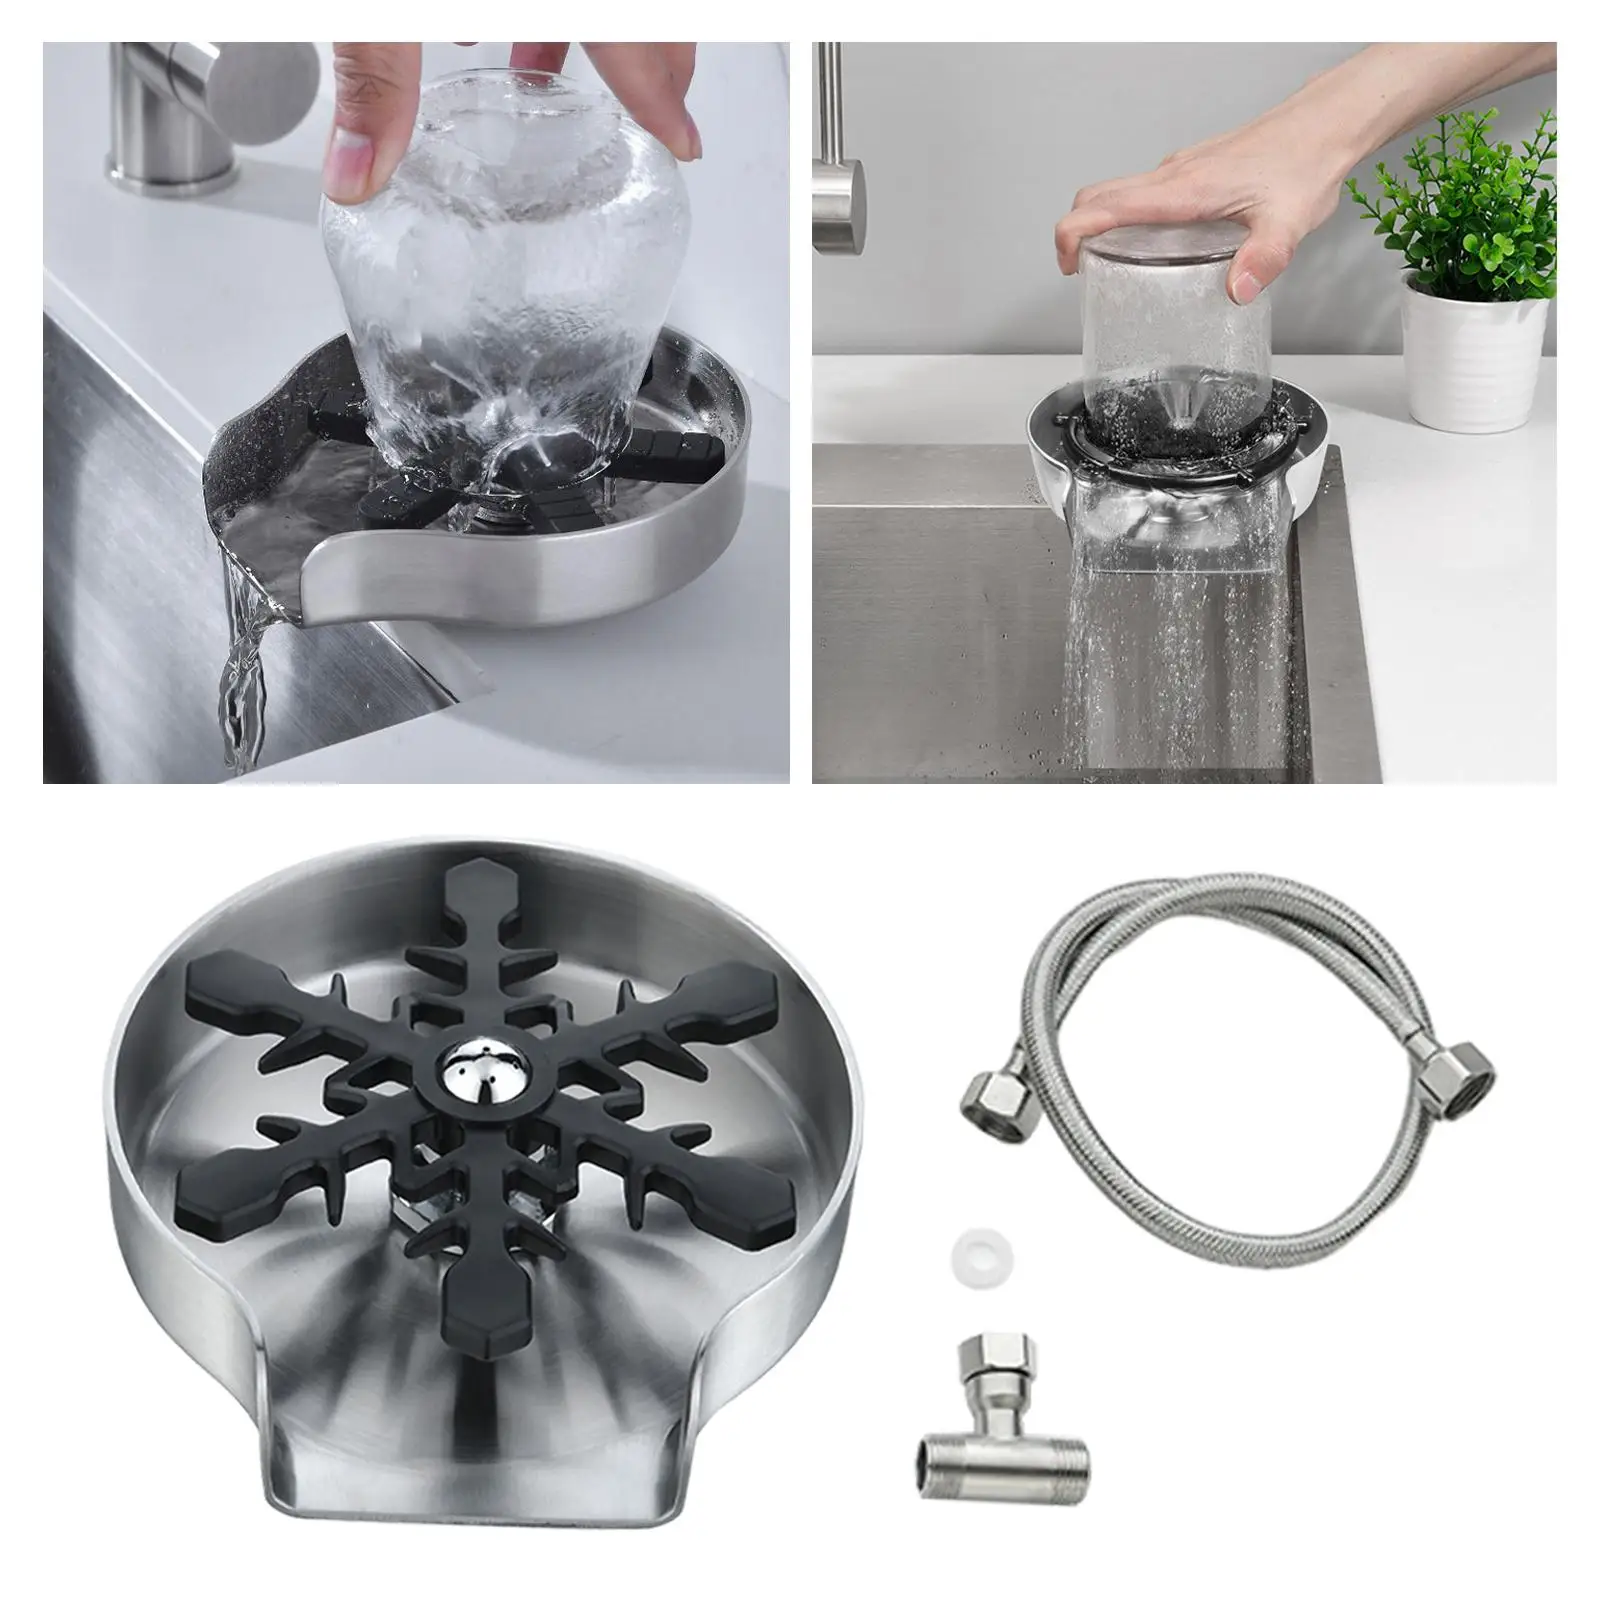 Automatic Cup Washer Cleaning Accessories Flushing Device Rust-Proof Sinks Glass Washer for Kitchen Bar Office Coffee Cup Bottle